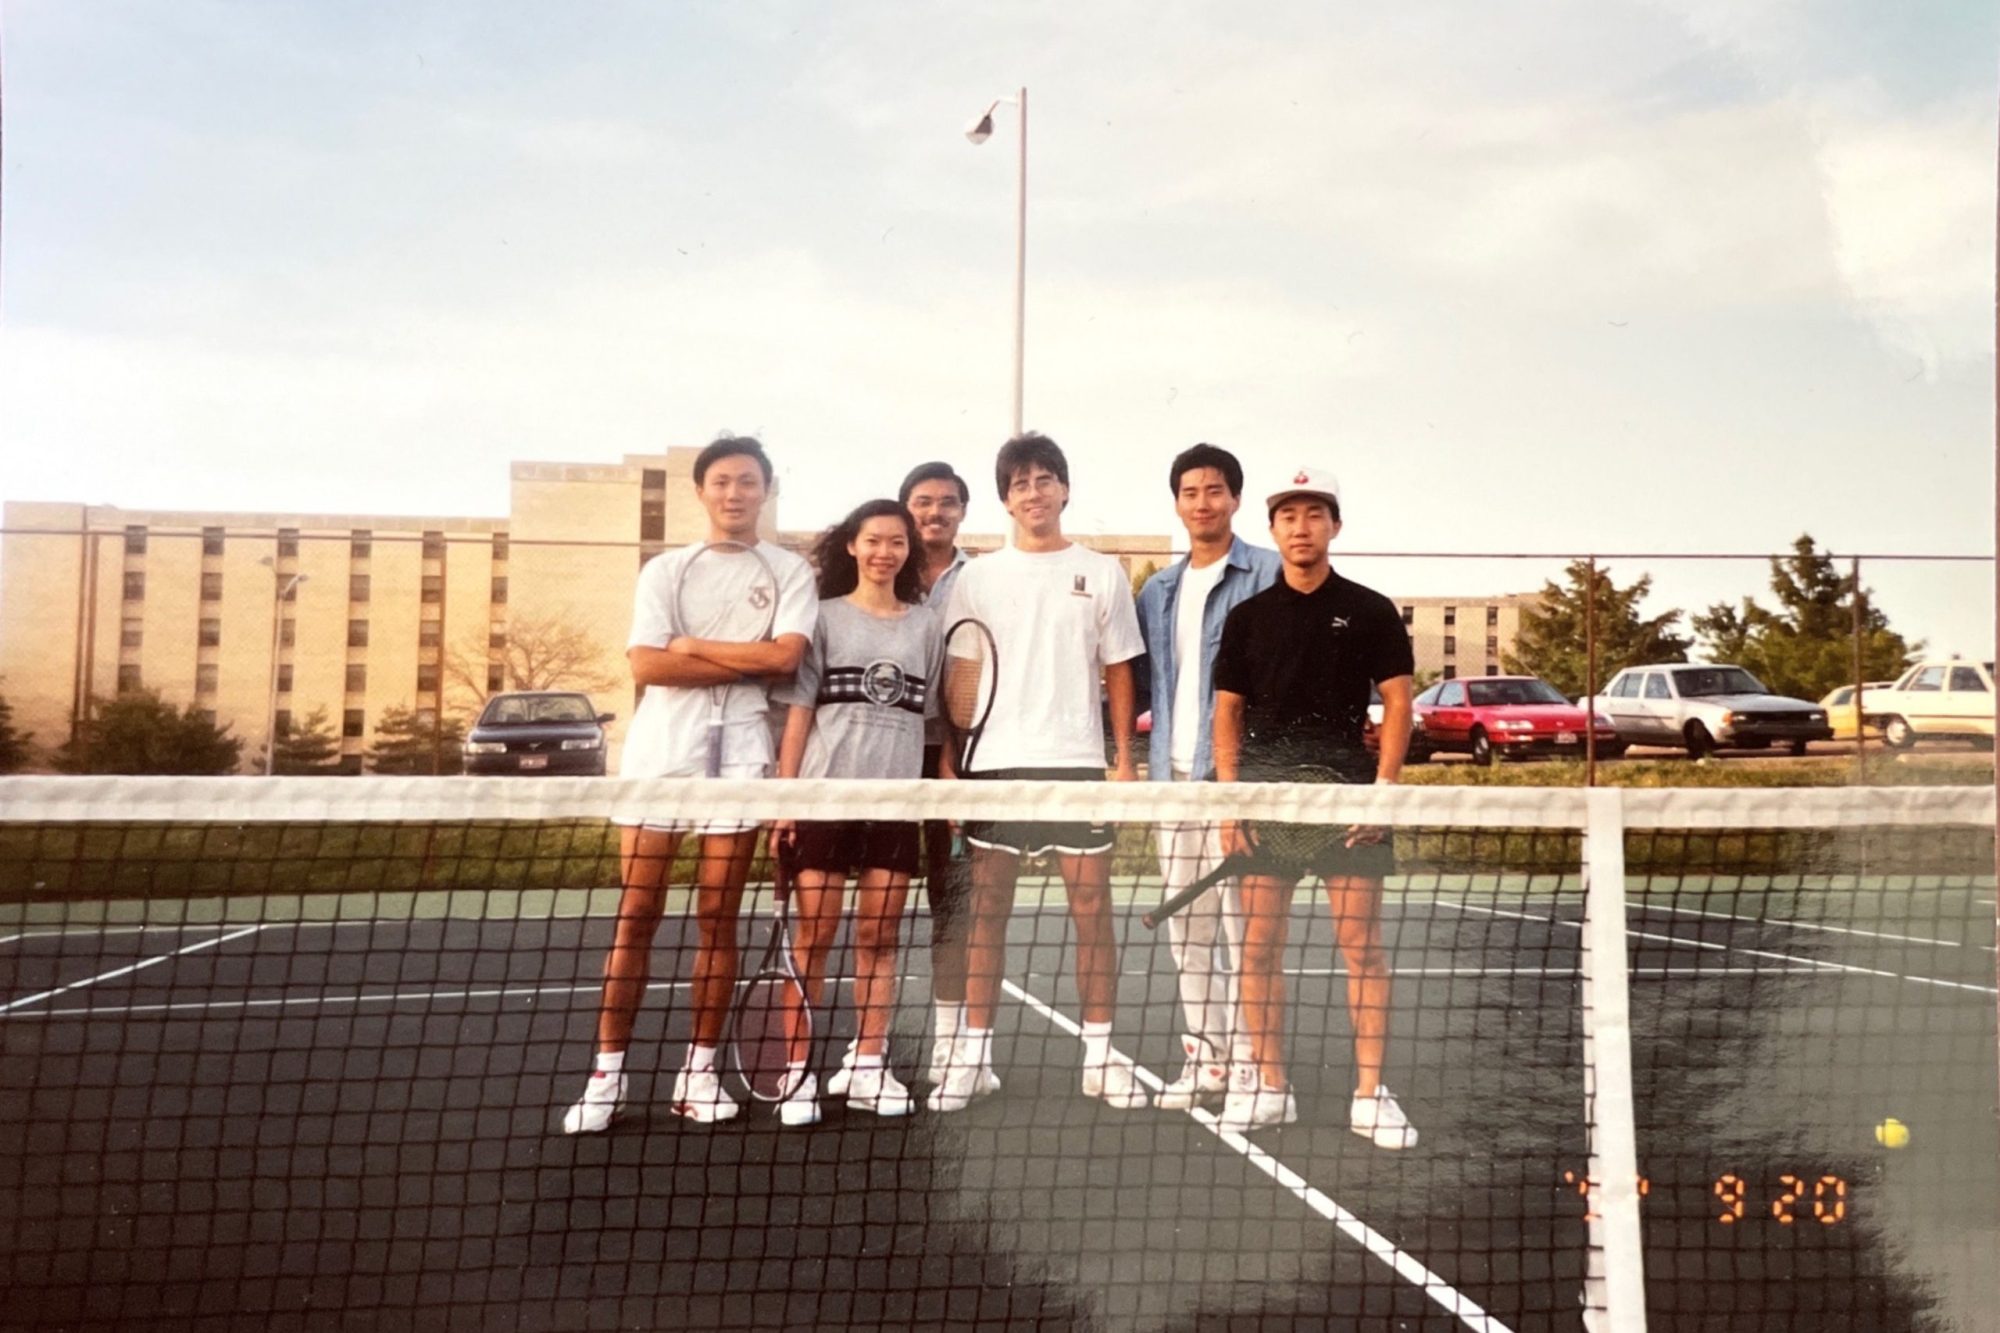 Historic photo of Chung-Ho Lin and Hsinyeh Hsieh on the tennis courts with friends